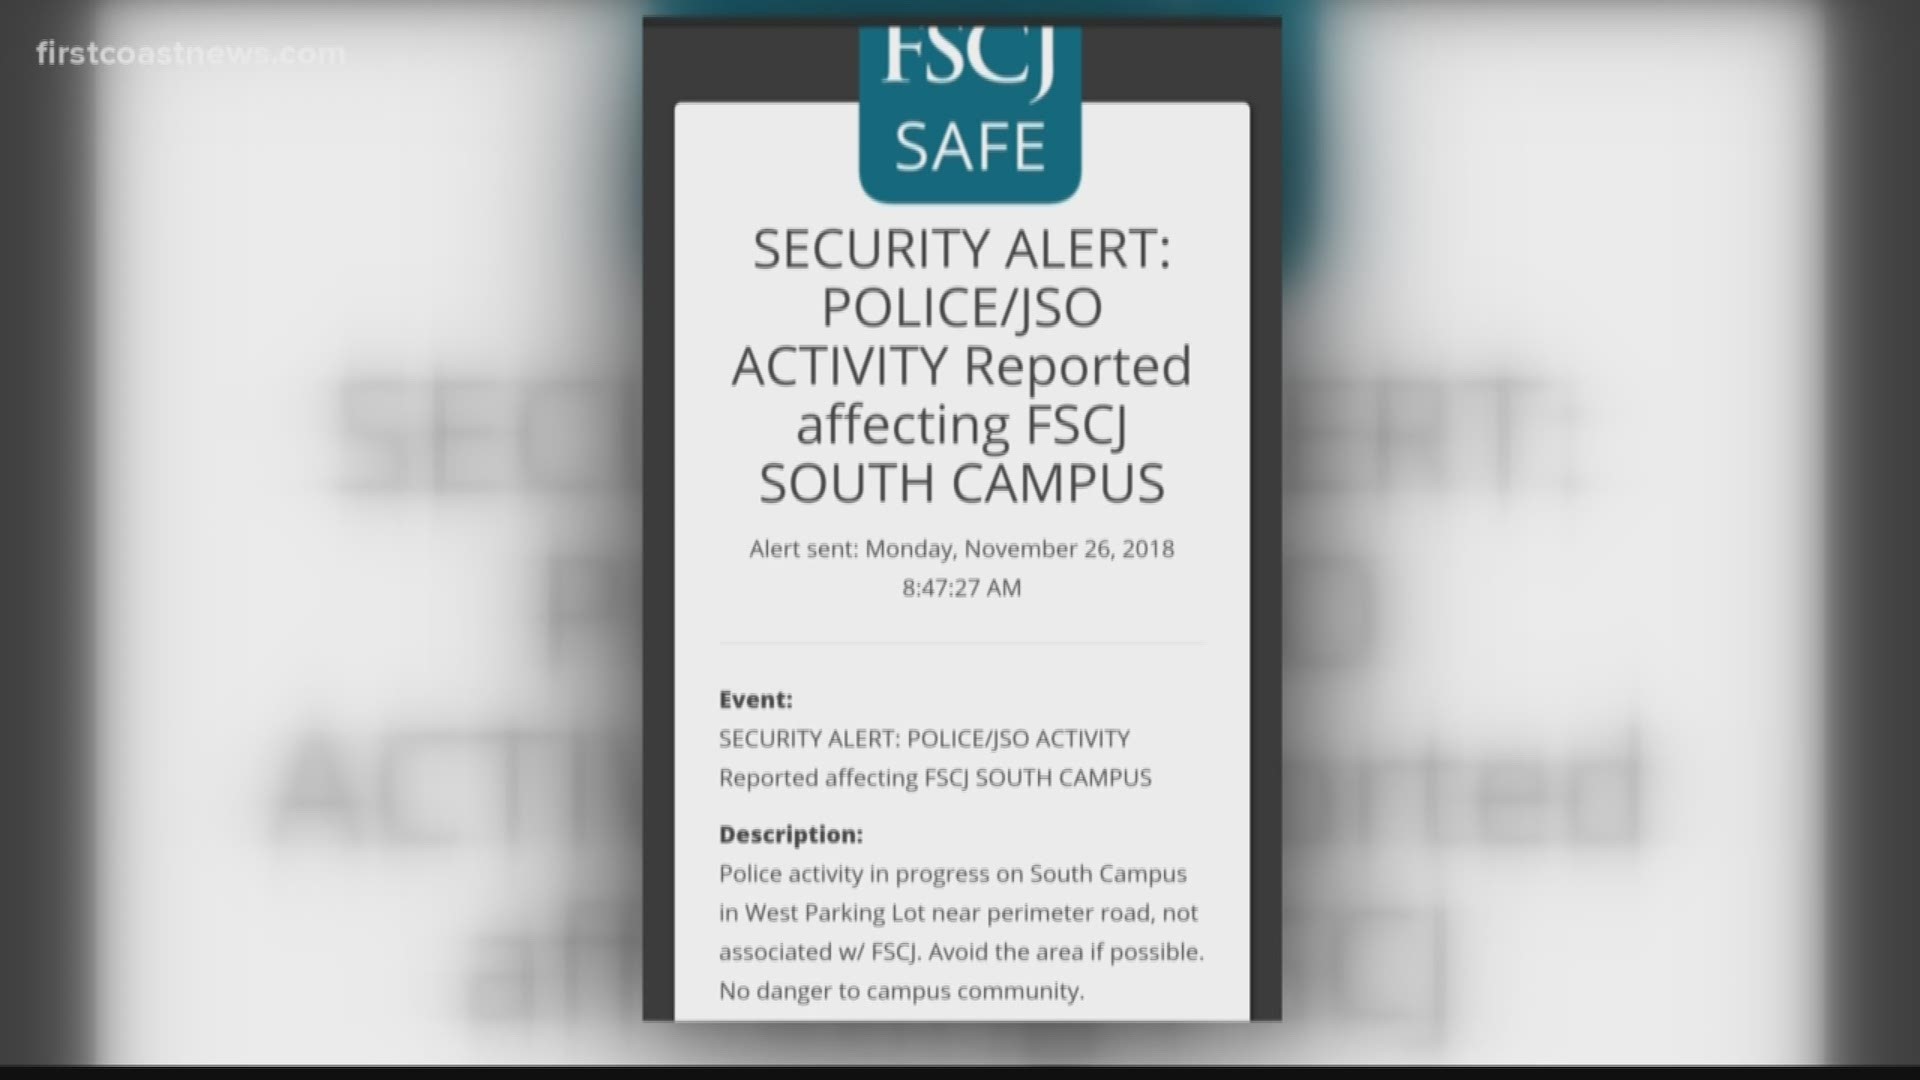 The school issued a security alert around 8:47 a.m. The alert stated that police activity was in progress on South Campus in West Parking Lot near perimeter road. It also said the activity wasn't associated with FSCJ.